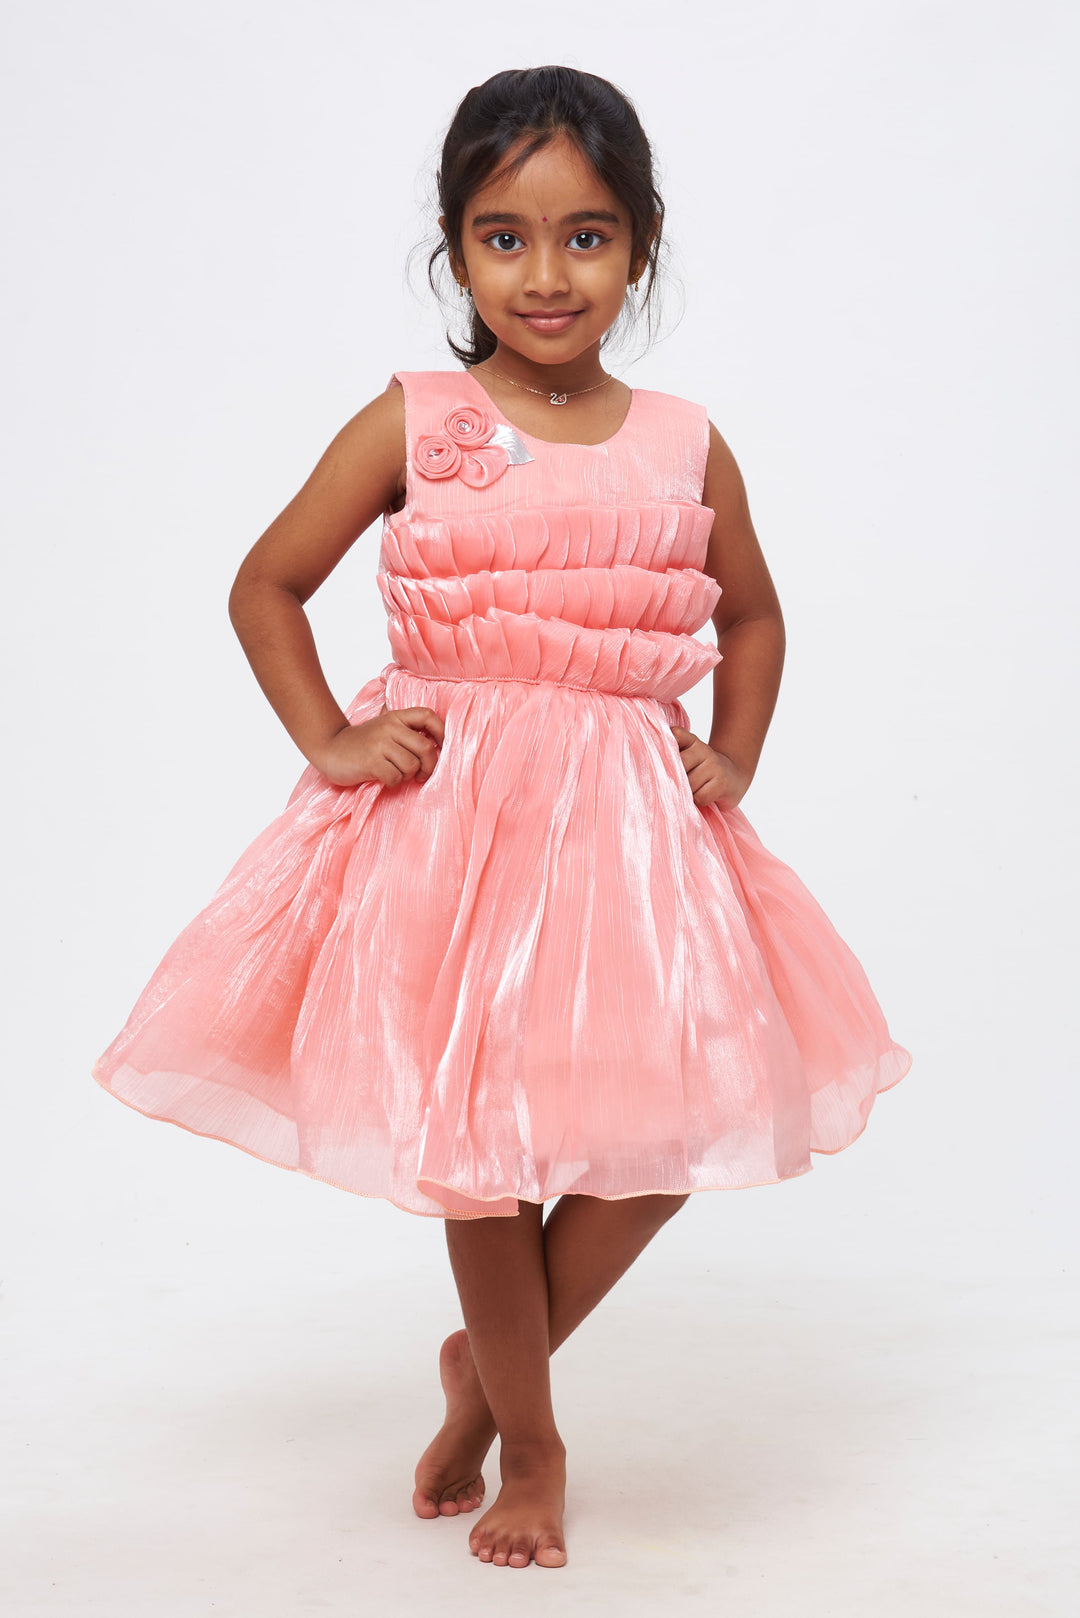 The Nesavu Girls Fancy Party Frock Blush Blossom: Girls Pink Tulle Frock with Rosette Accents Nesavu 16 (1Y) / Pink / Satin Organza PF155A-16 The Perfect Twirl | Elegant Frocks for Girls' Party Nights | The Nesavu